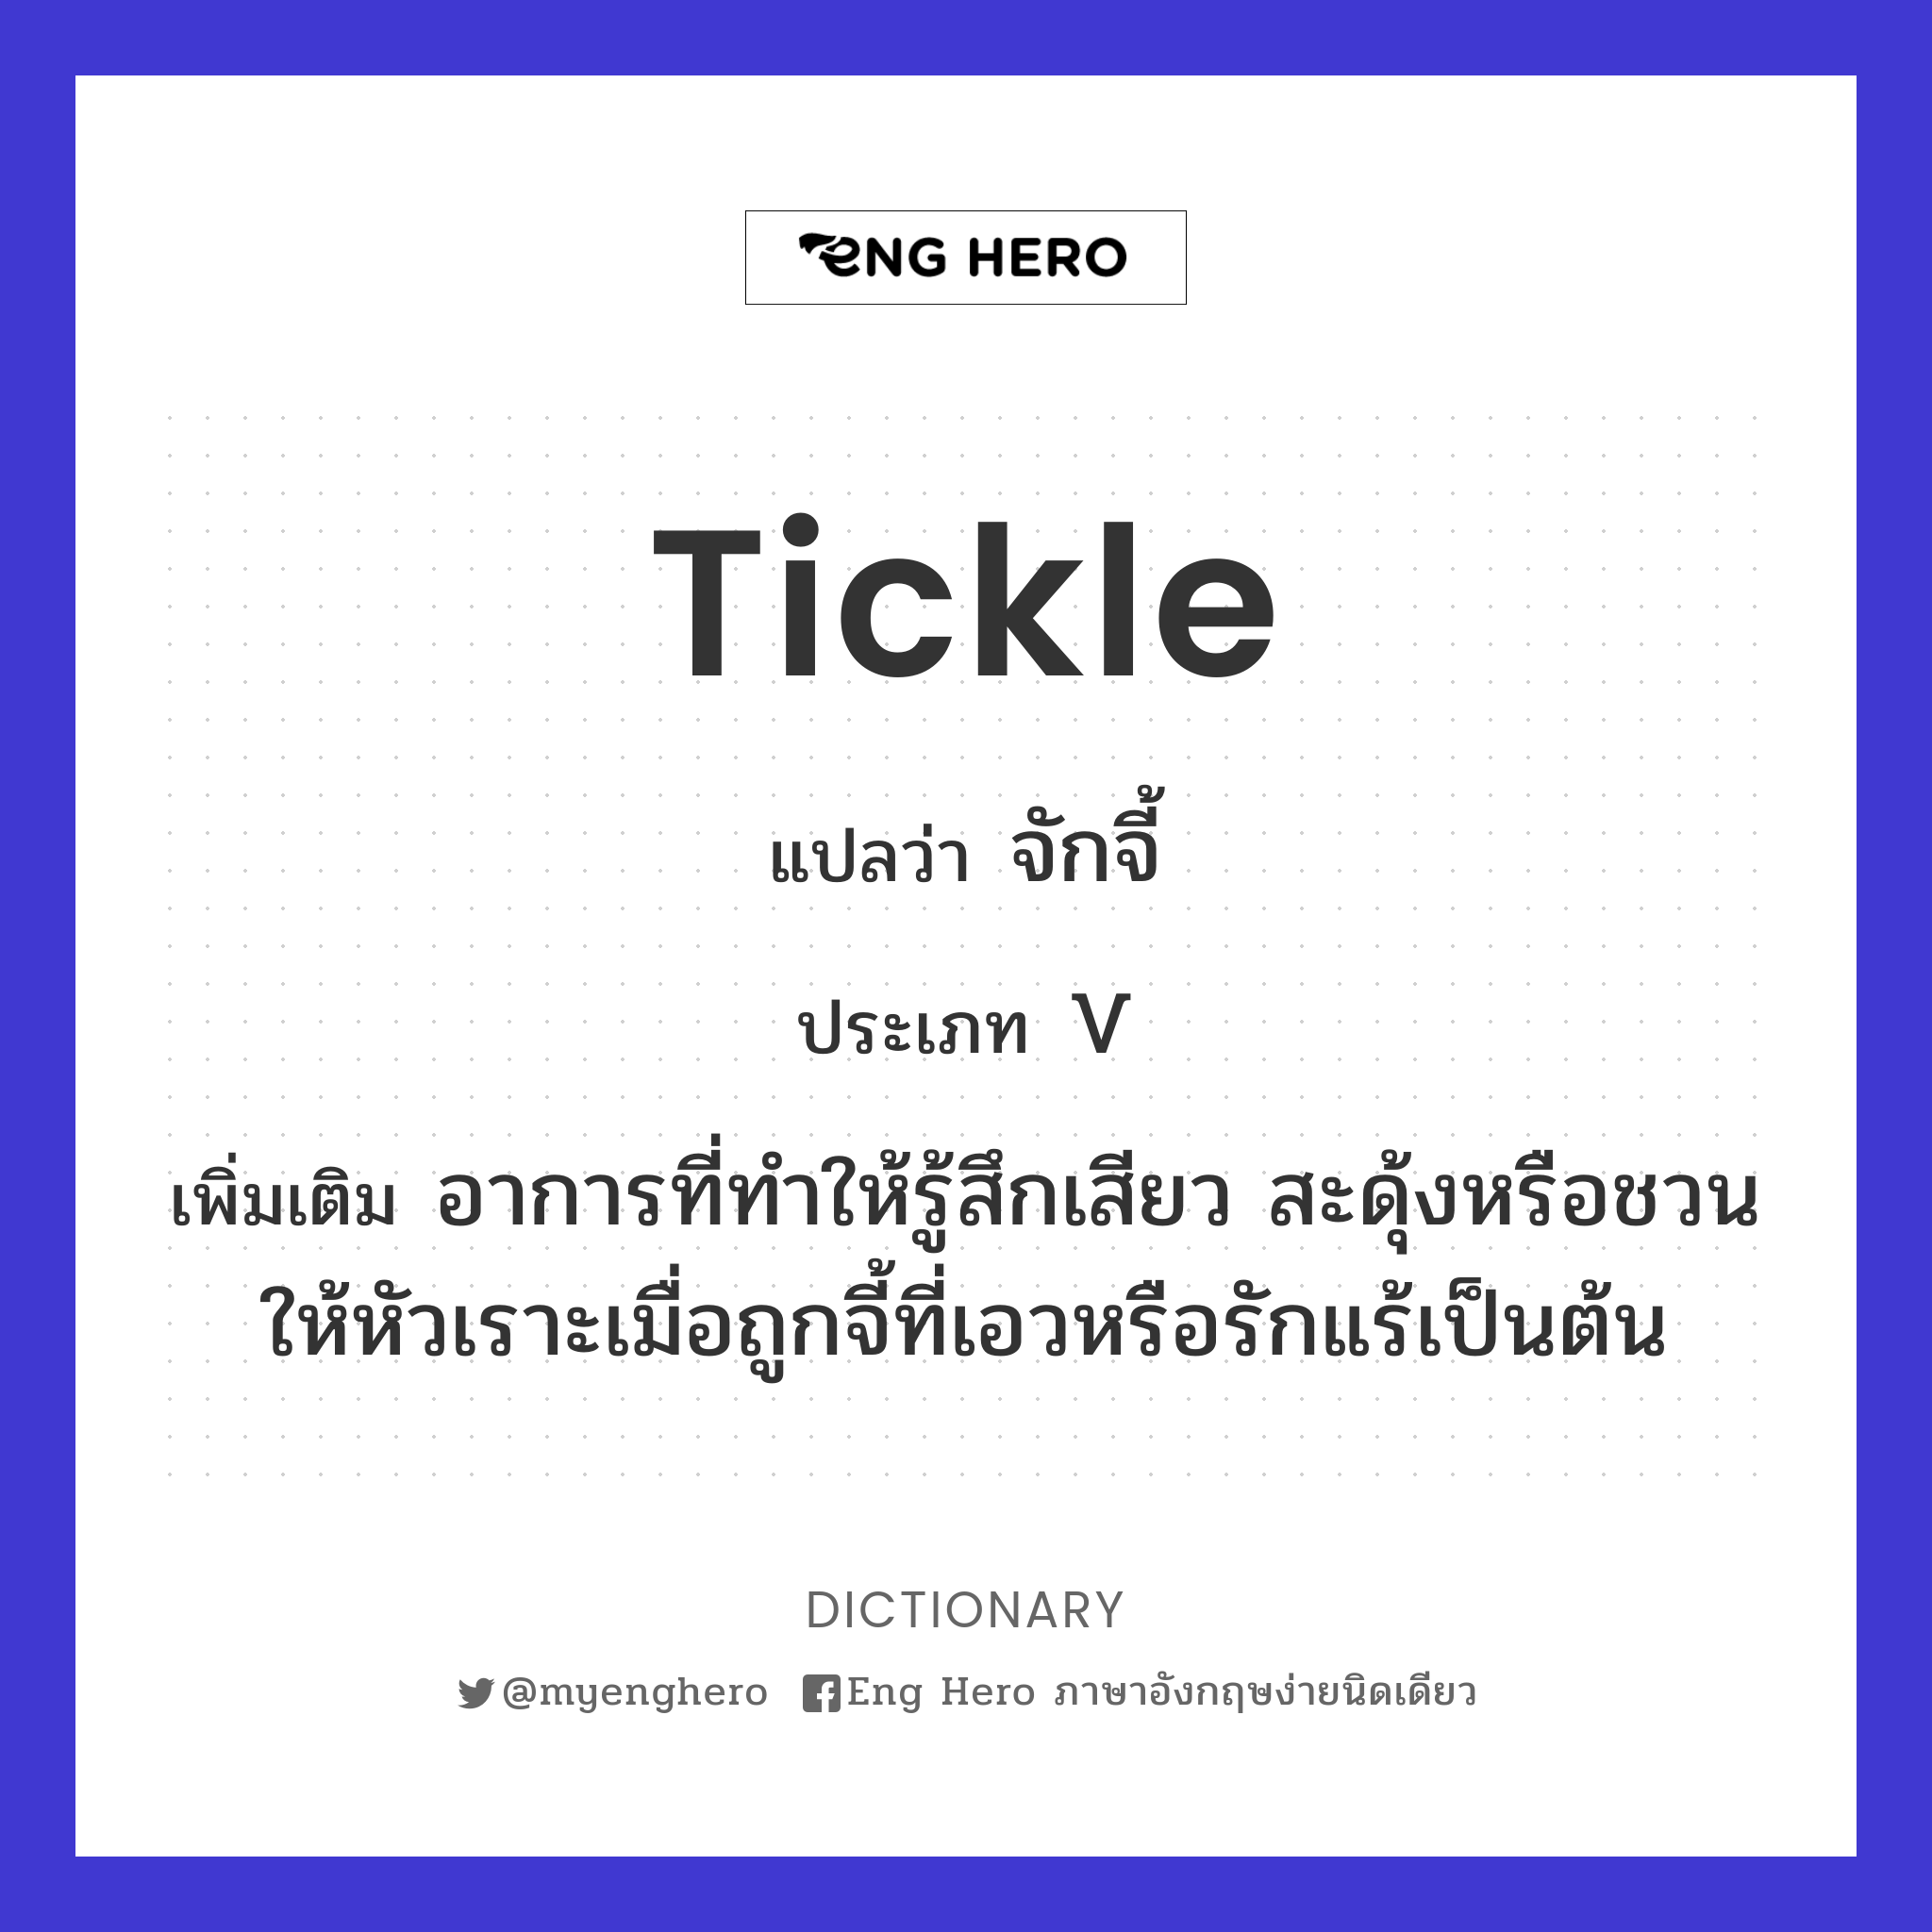 tickle